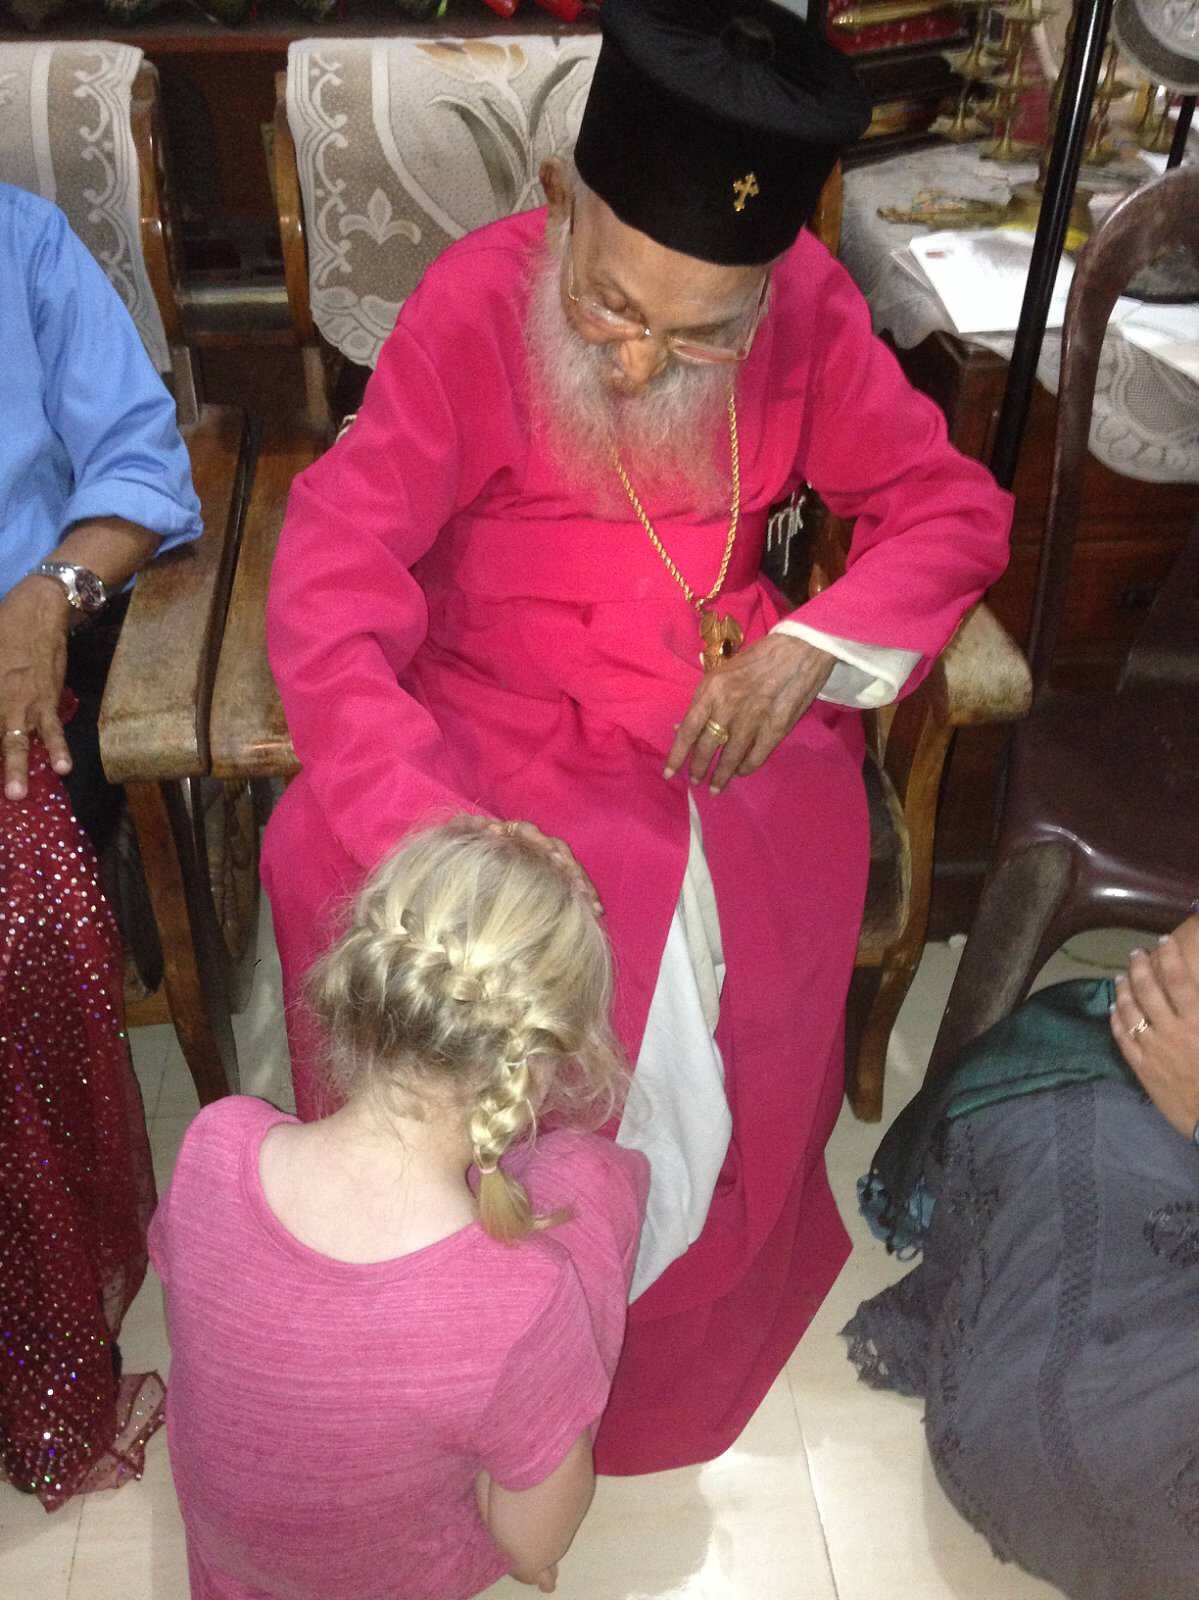 Child sitting in front of Indian Rev. Father